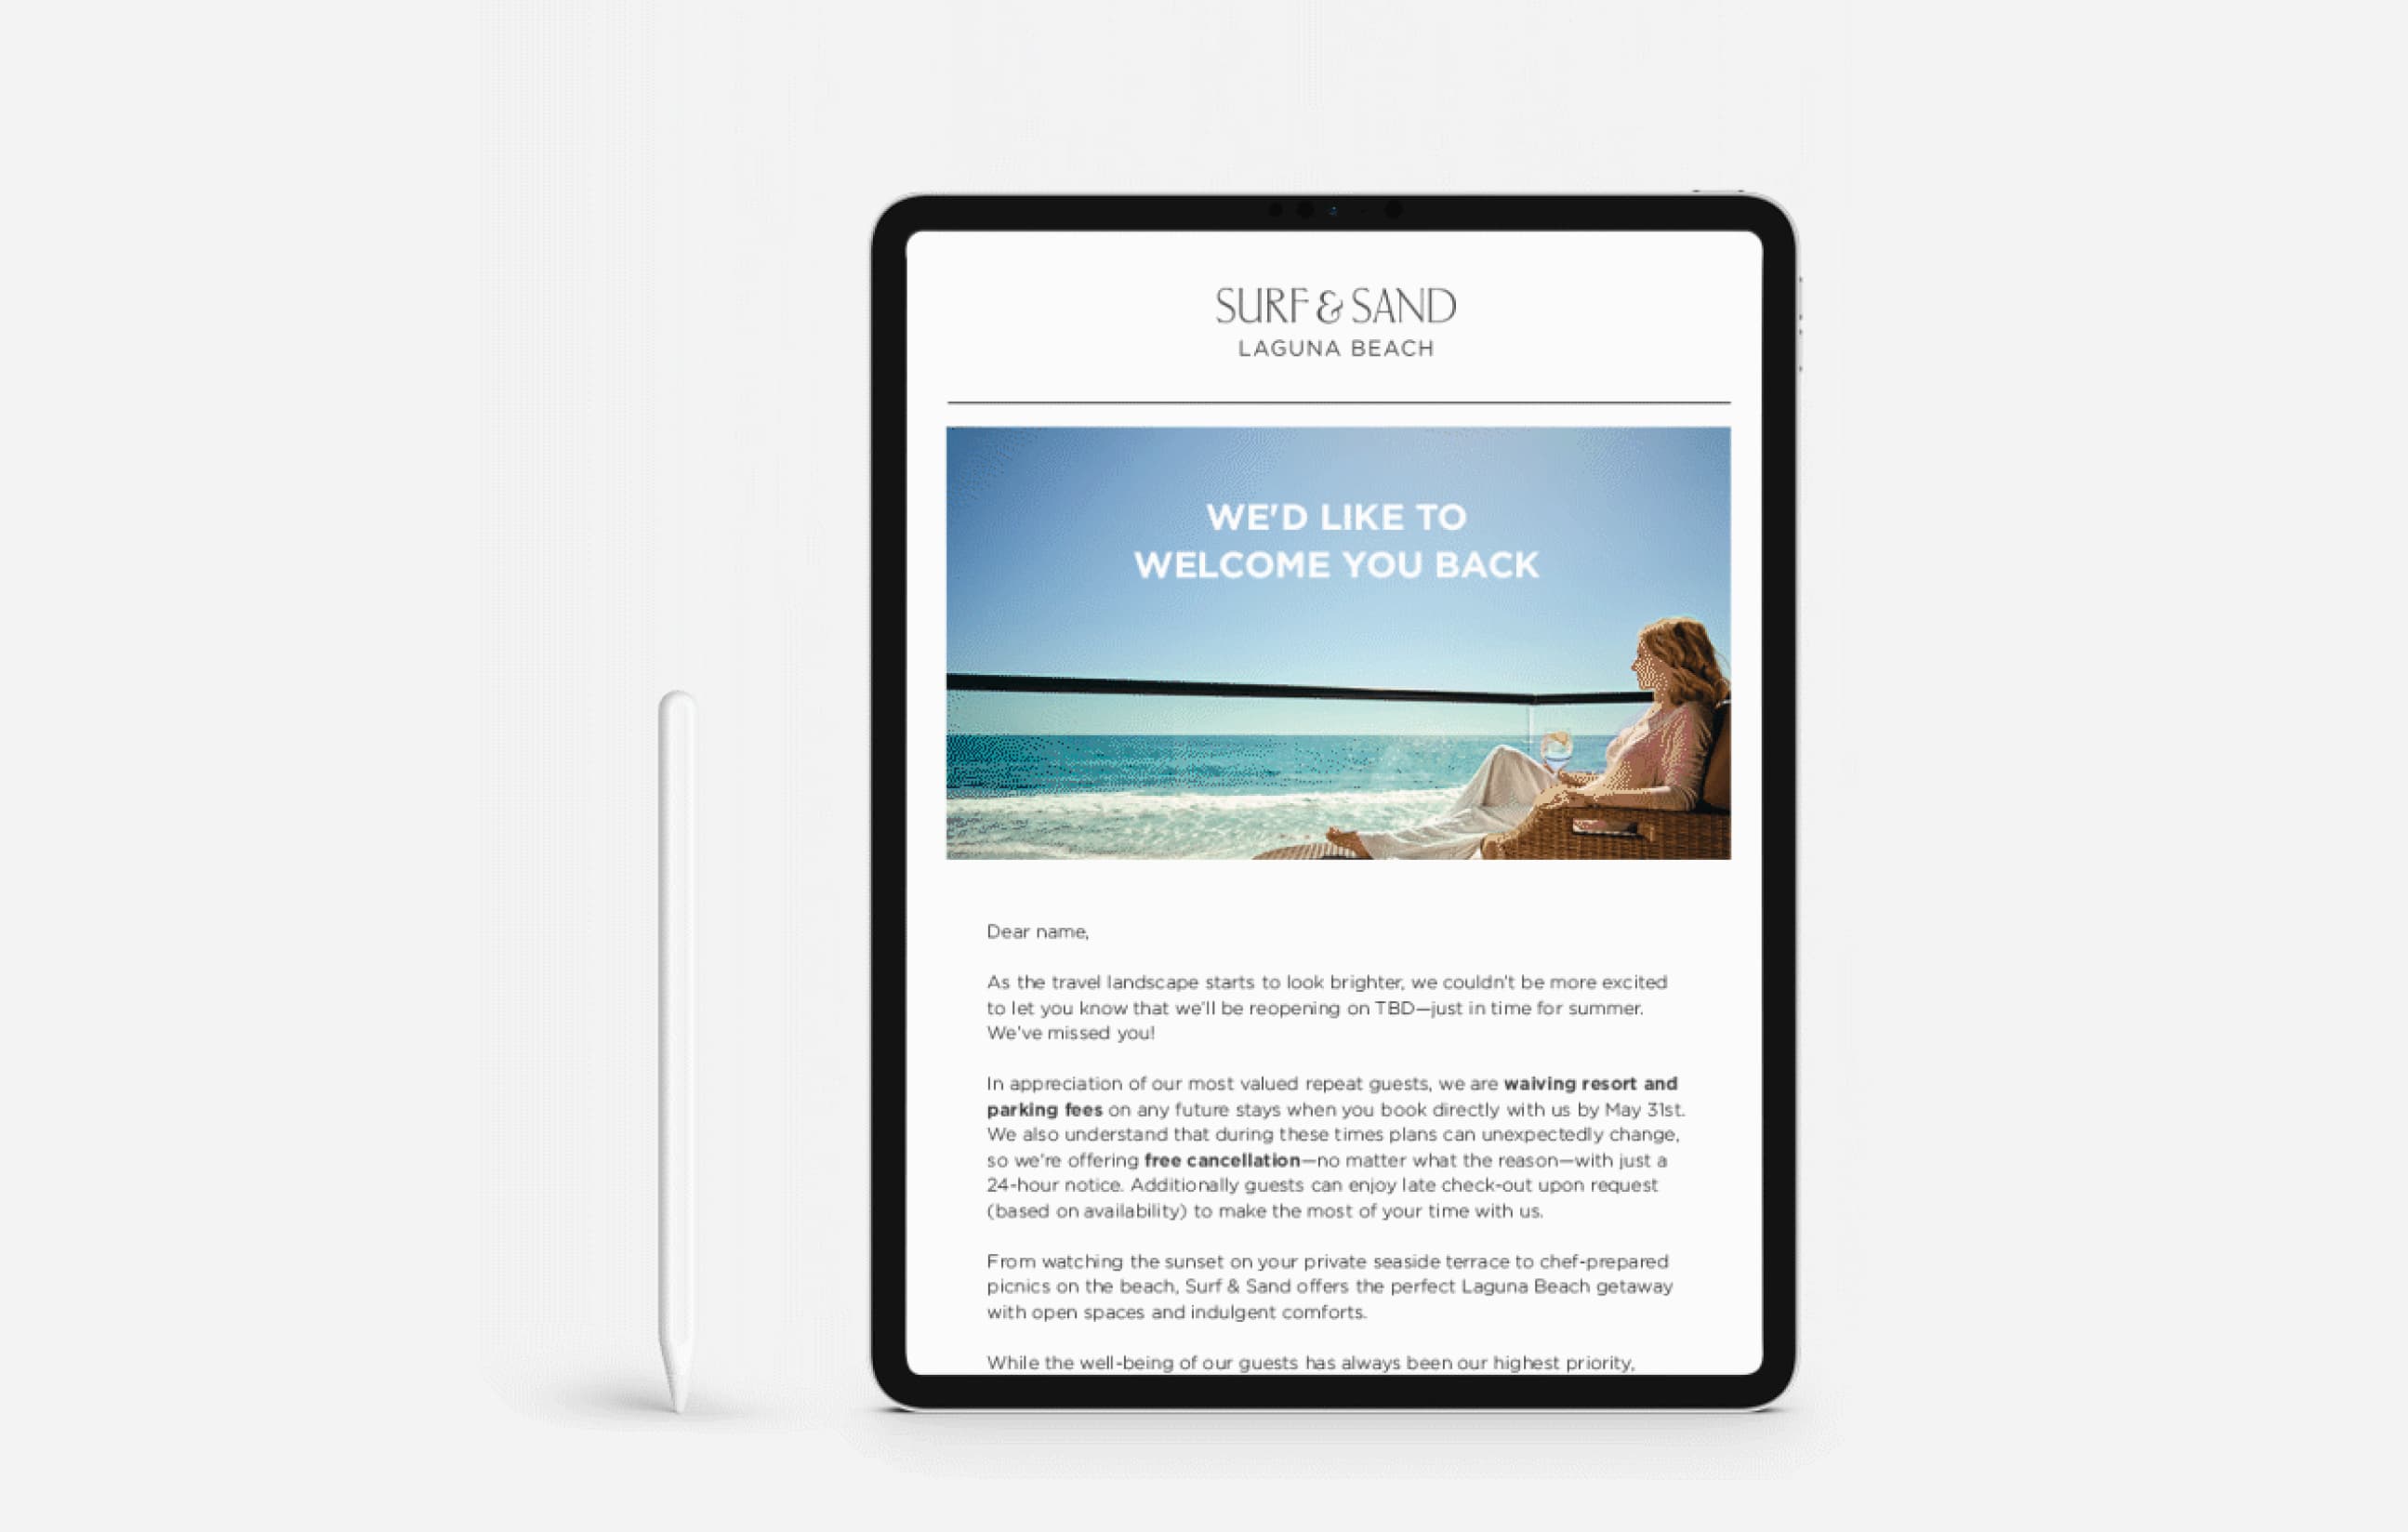 Surf & Sand email campaign displayed on an iPad 